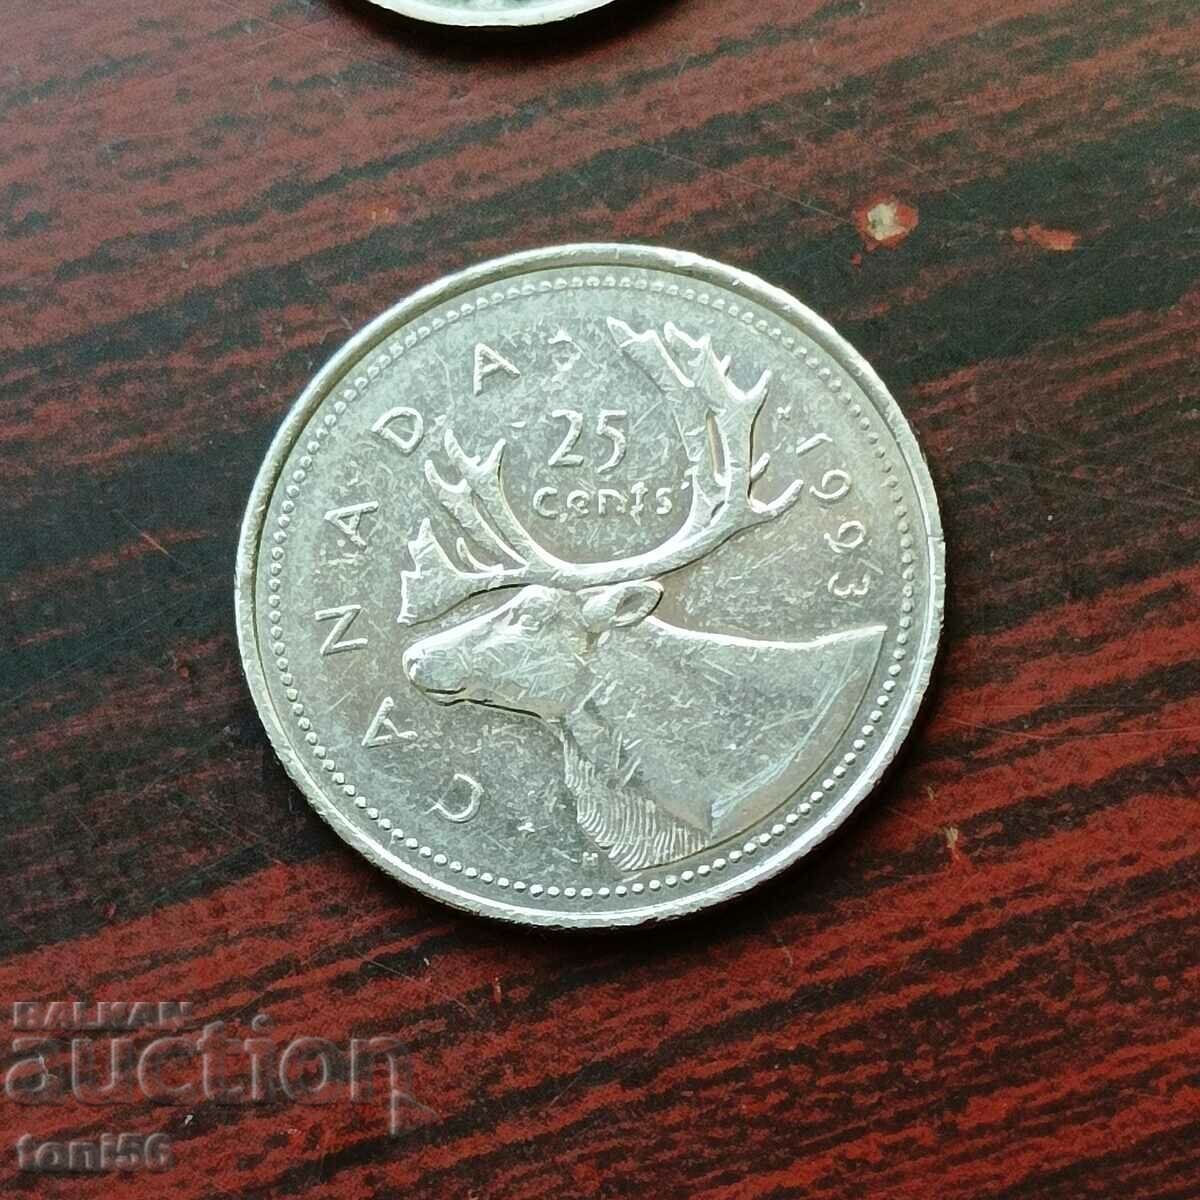 Canada 25 cents 1993